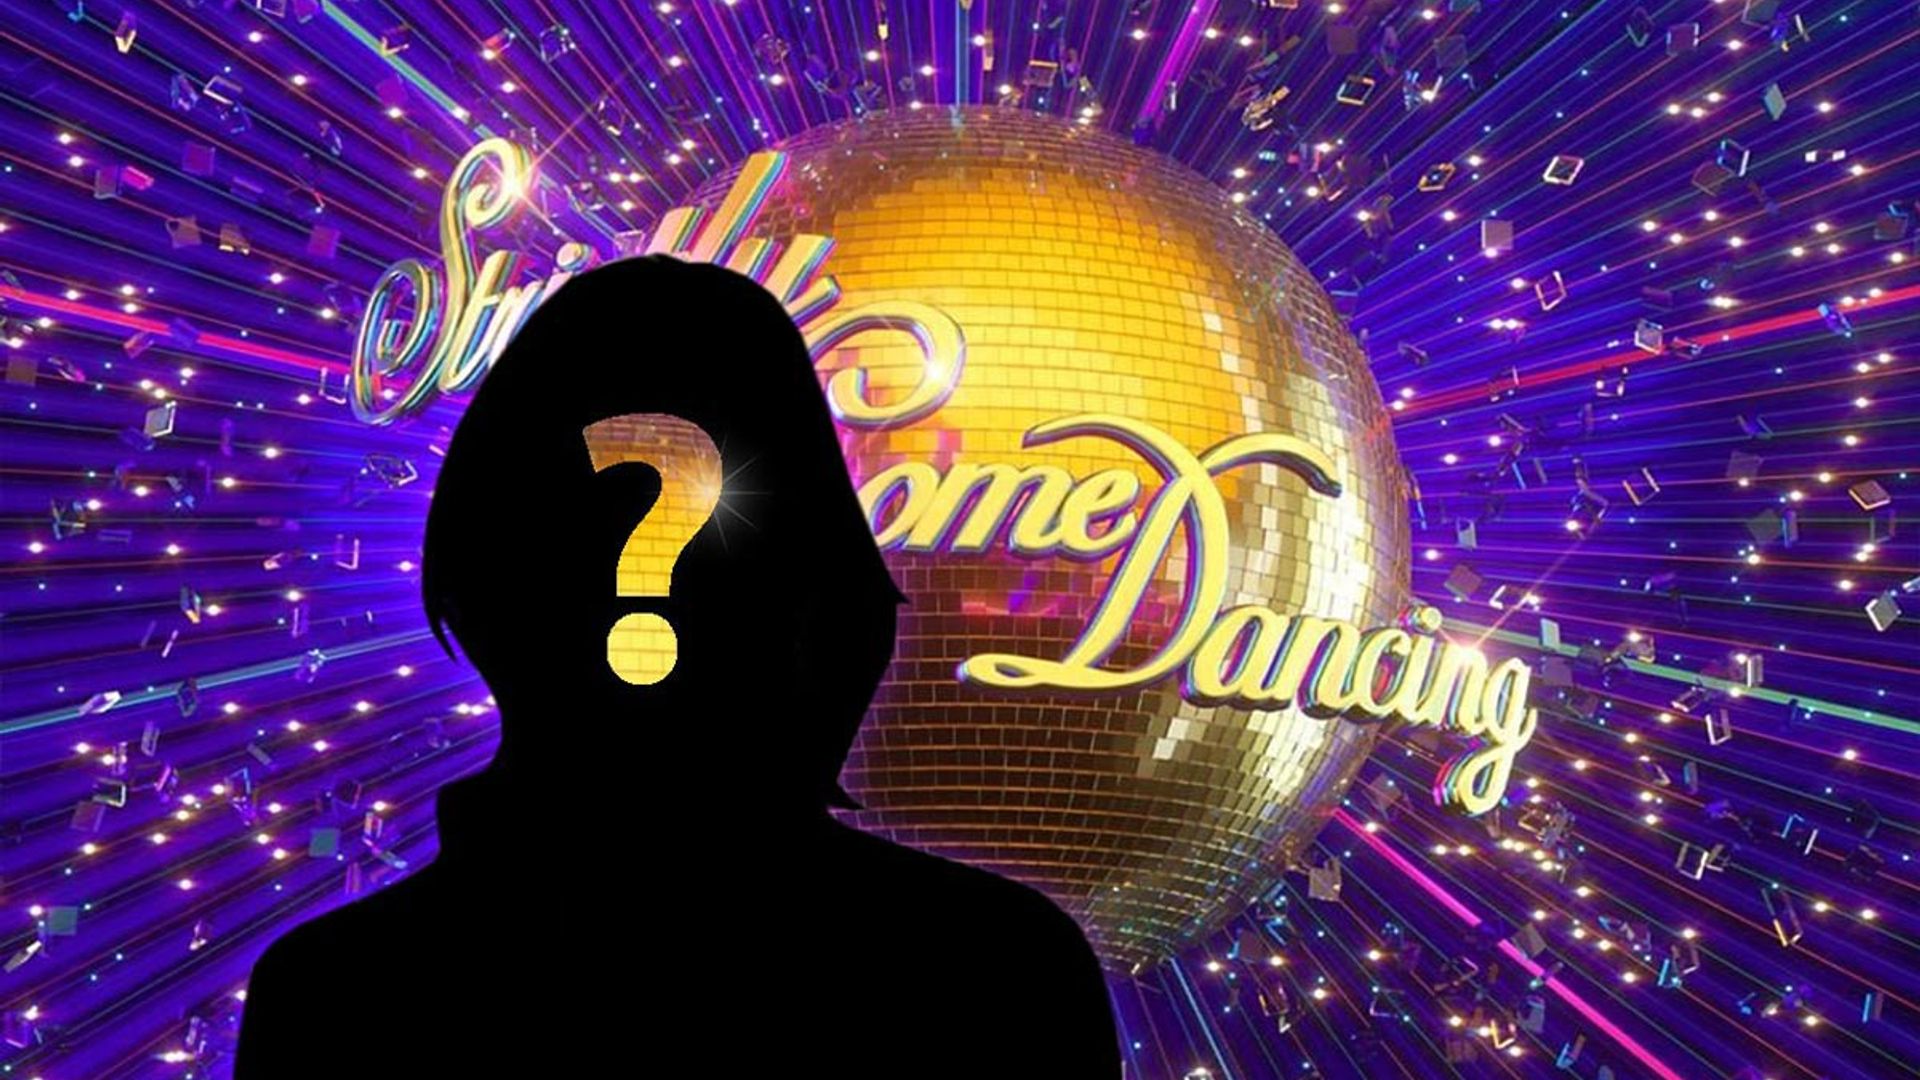 Strictly Come Dancing reveals first contestants – find out who they are!